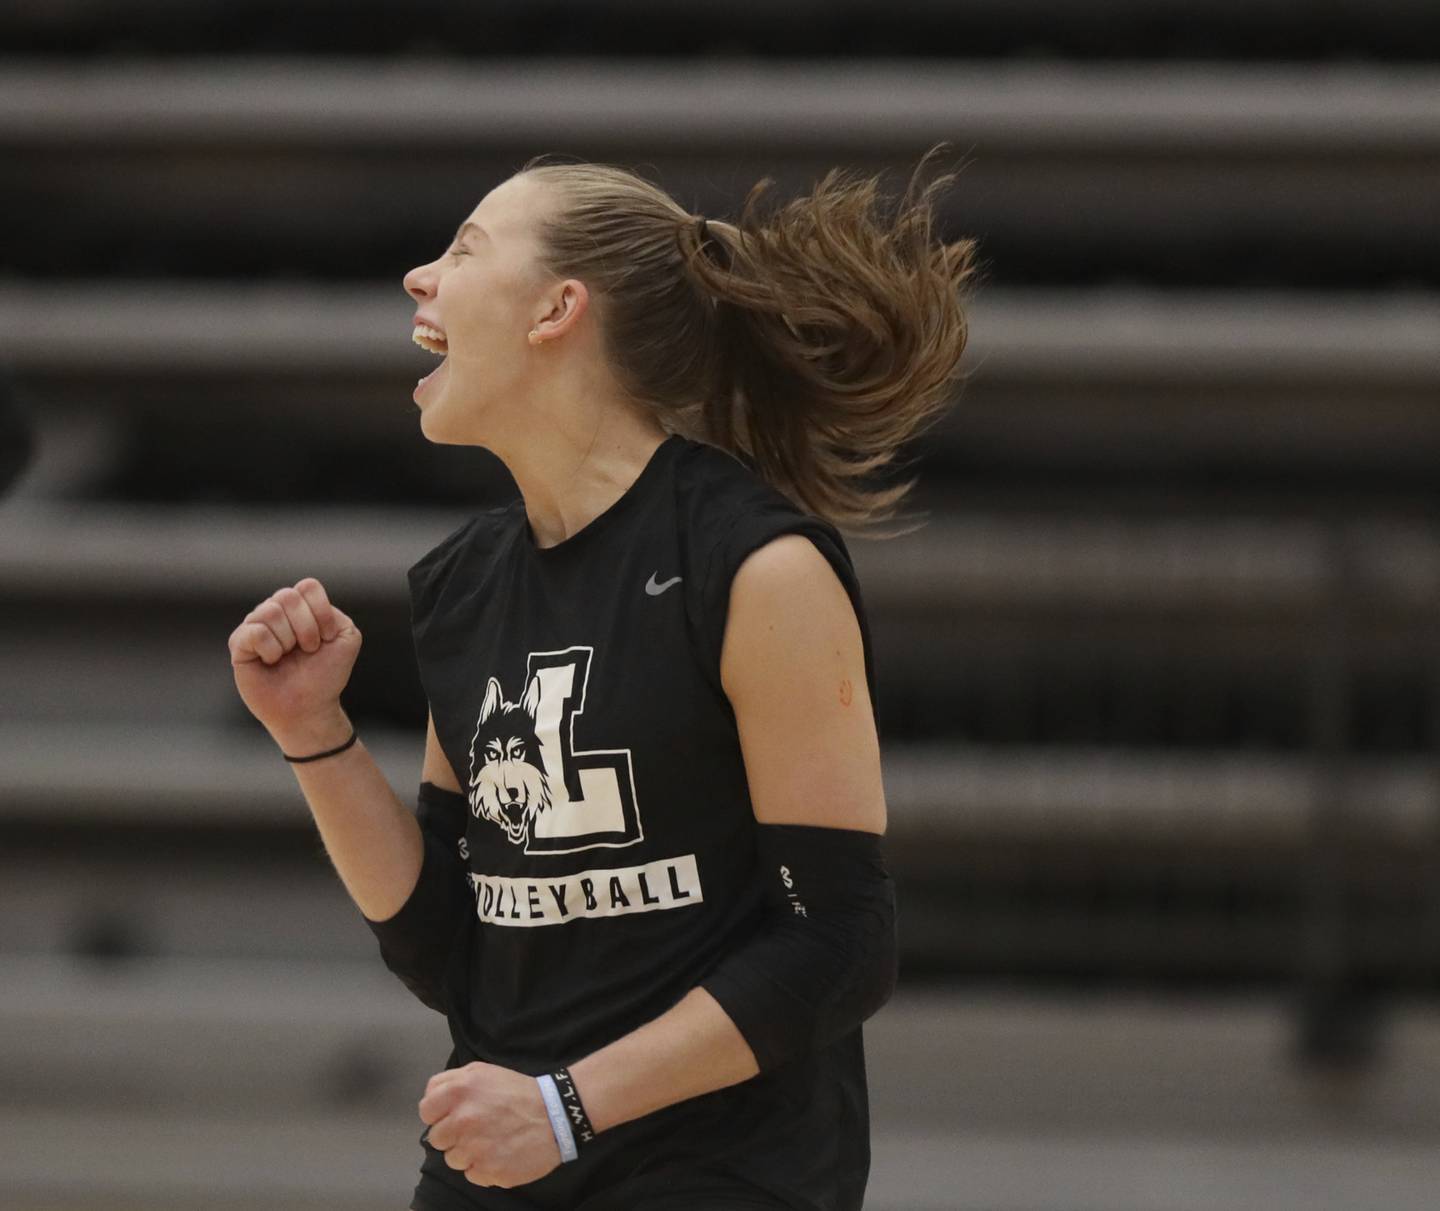 Loyola volleyball player Grace Hinchman celebrates a point during practice.